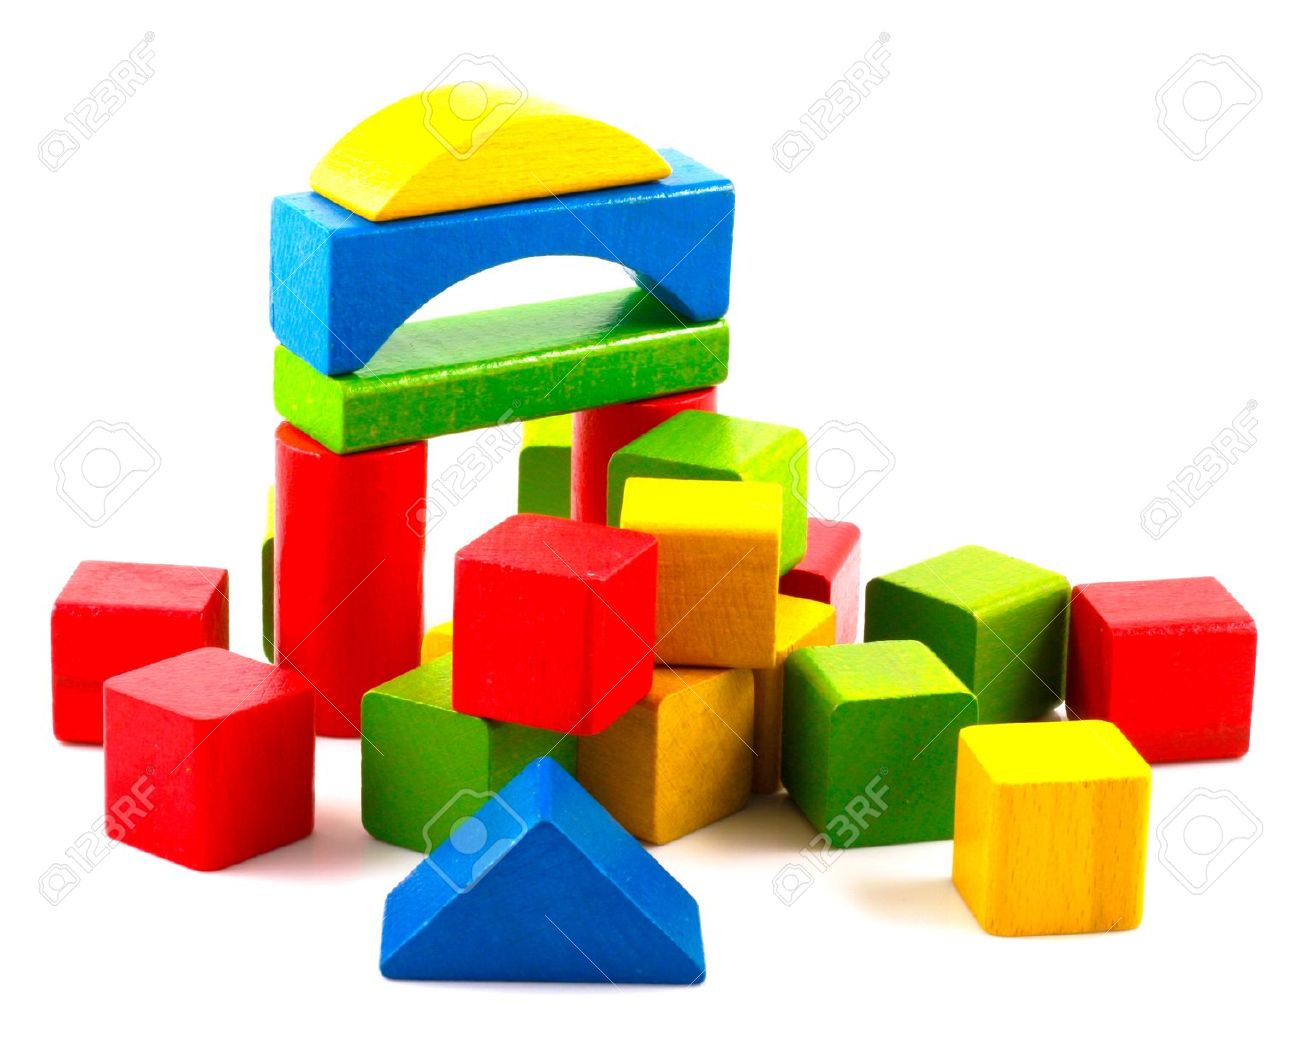 18 Pictures Of Building Block